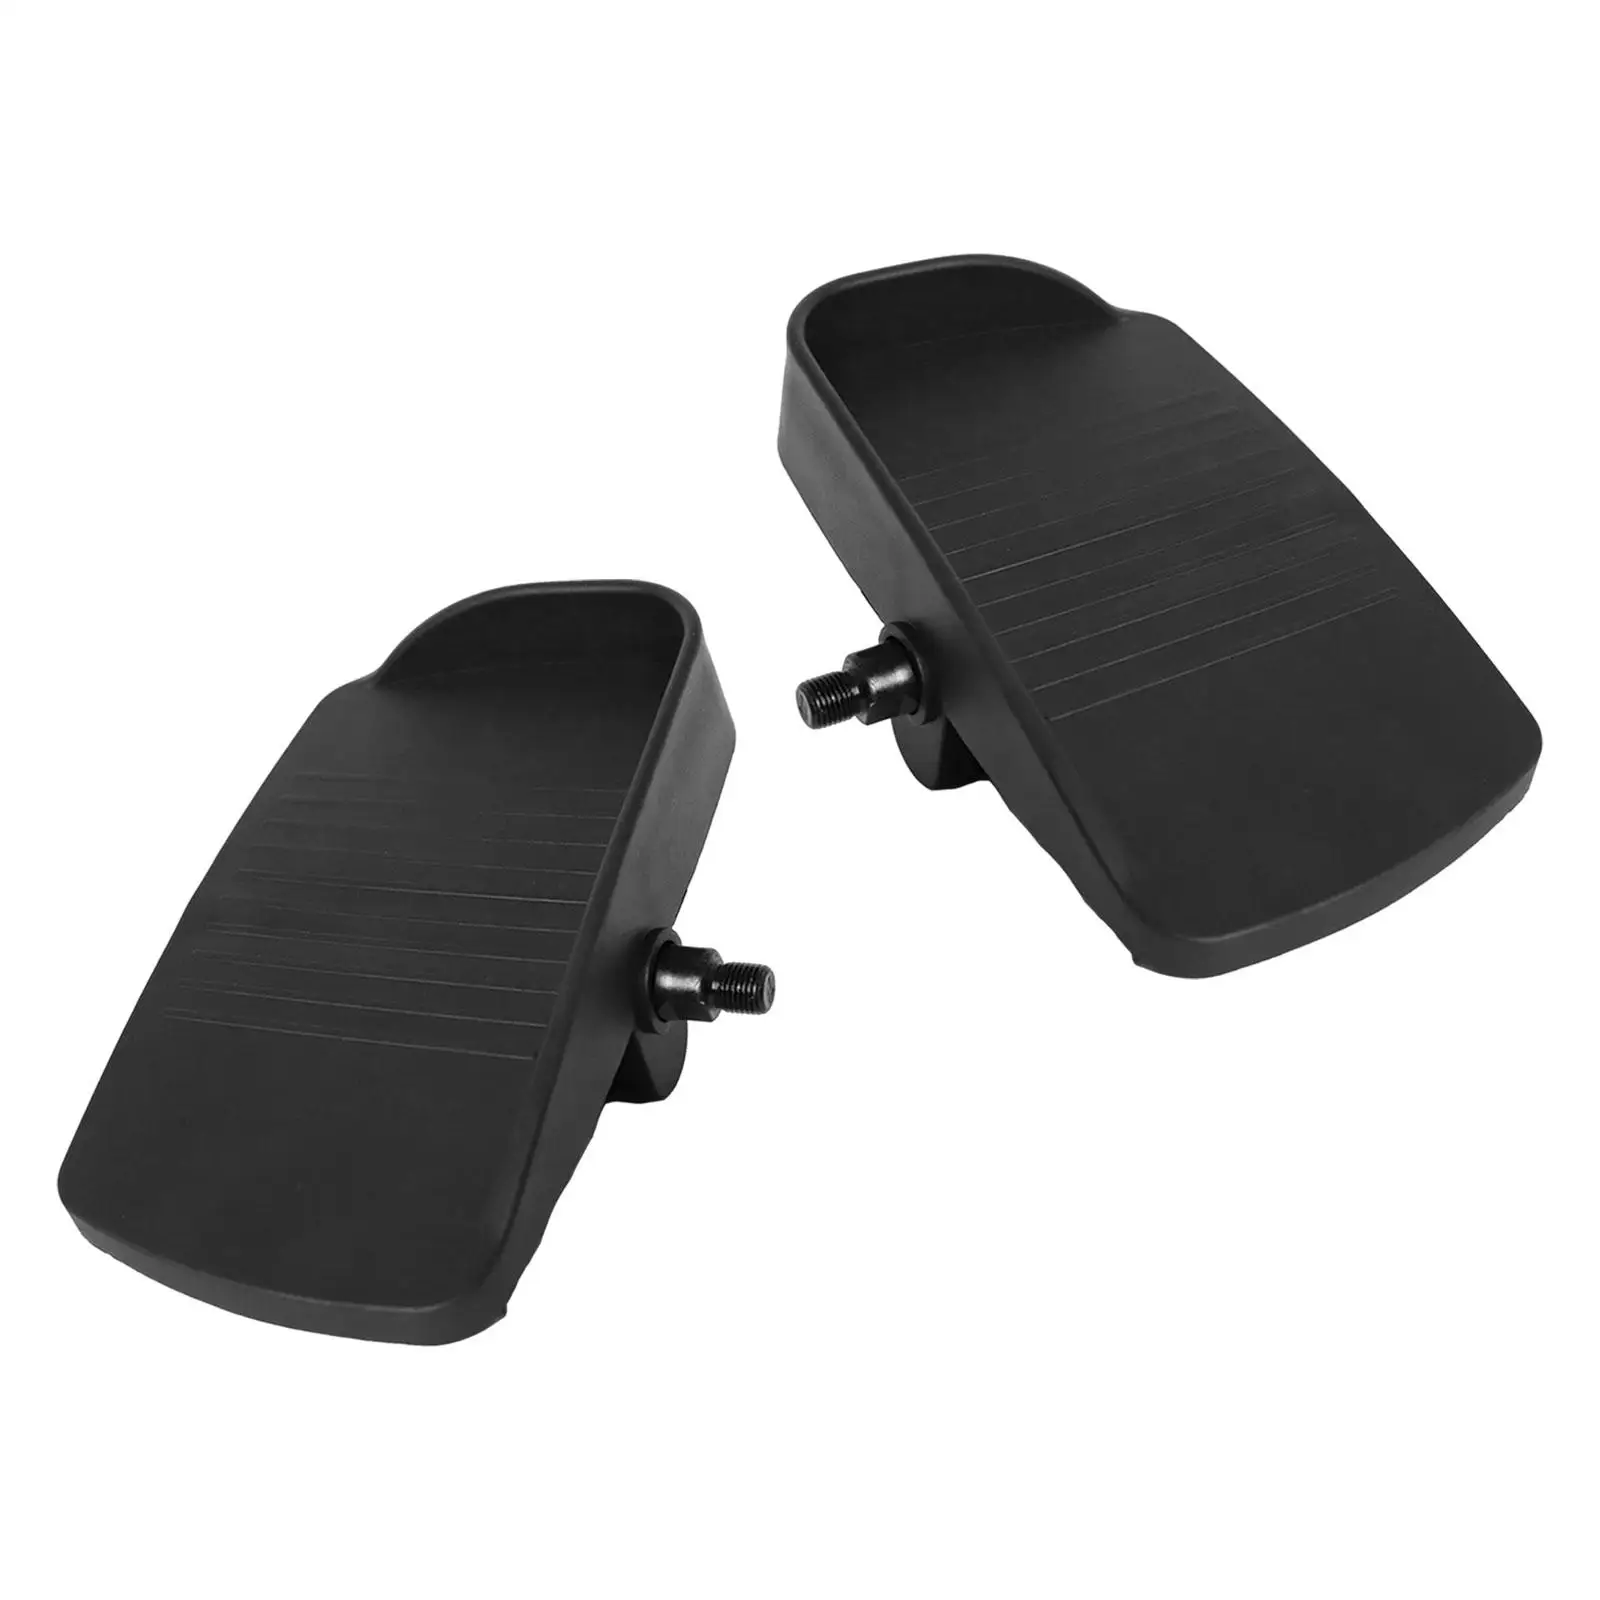 2 Pieces Stair Stepper Pedal Multifunction Elliptical Machine Foot Pedals